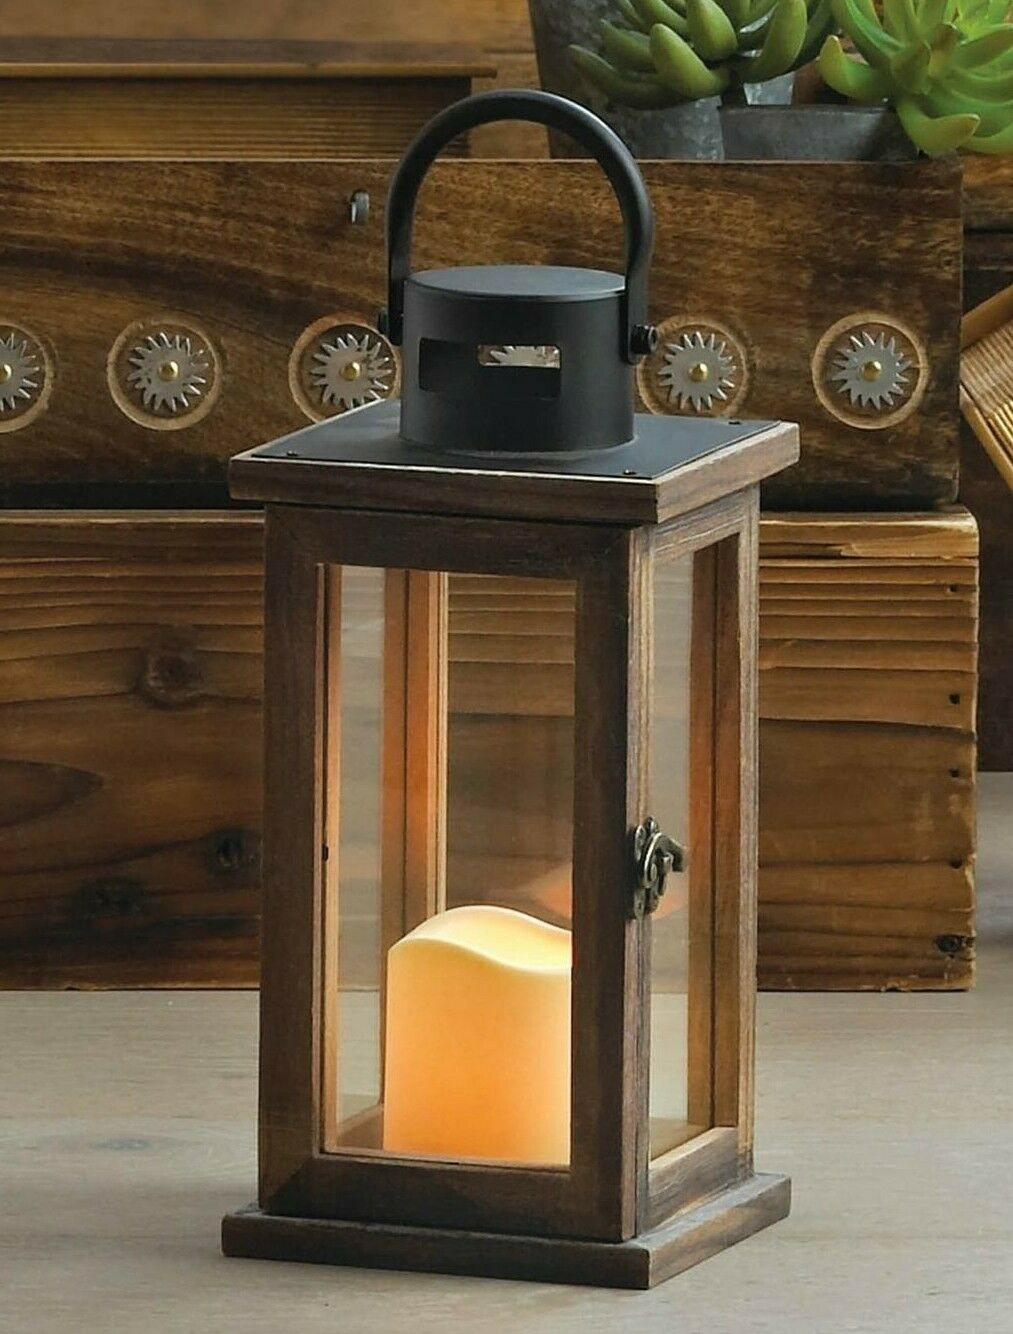 Wood Lantern with LED Candle - 11 inches